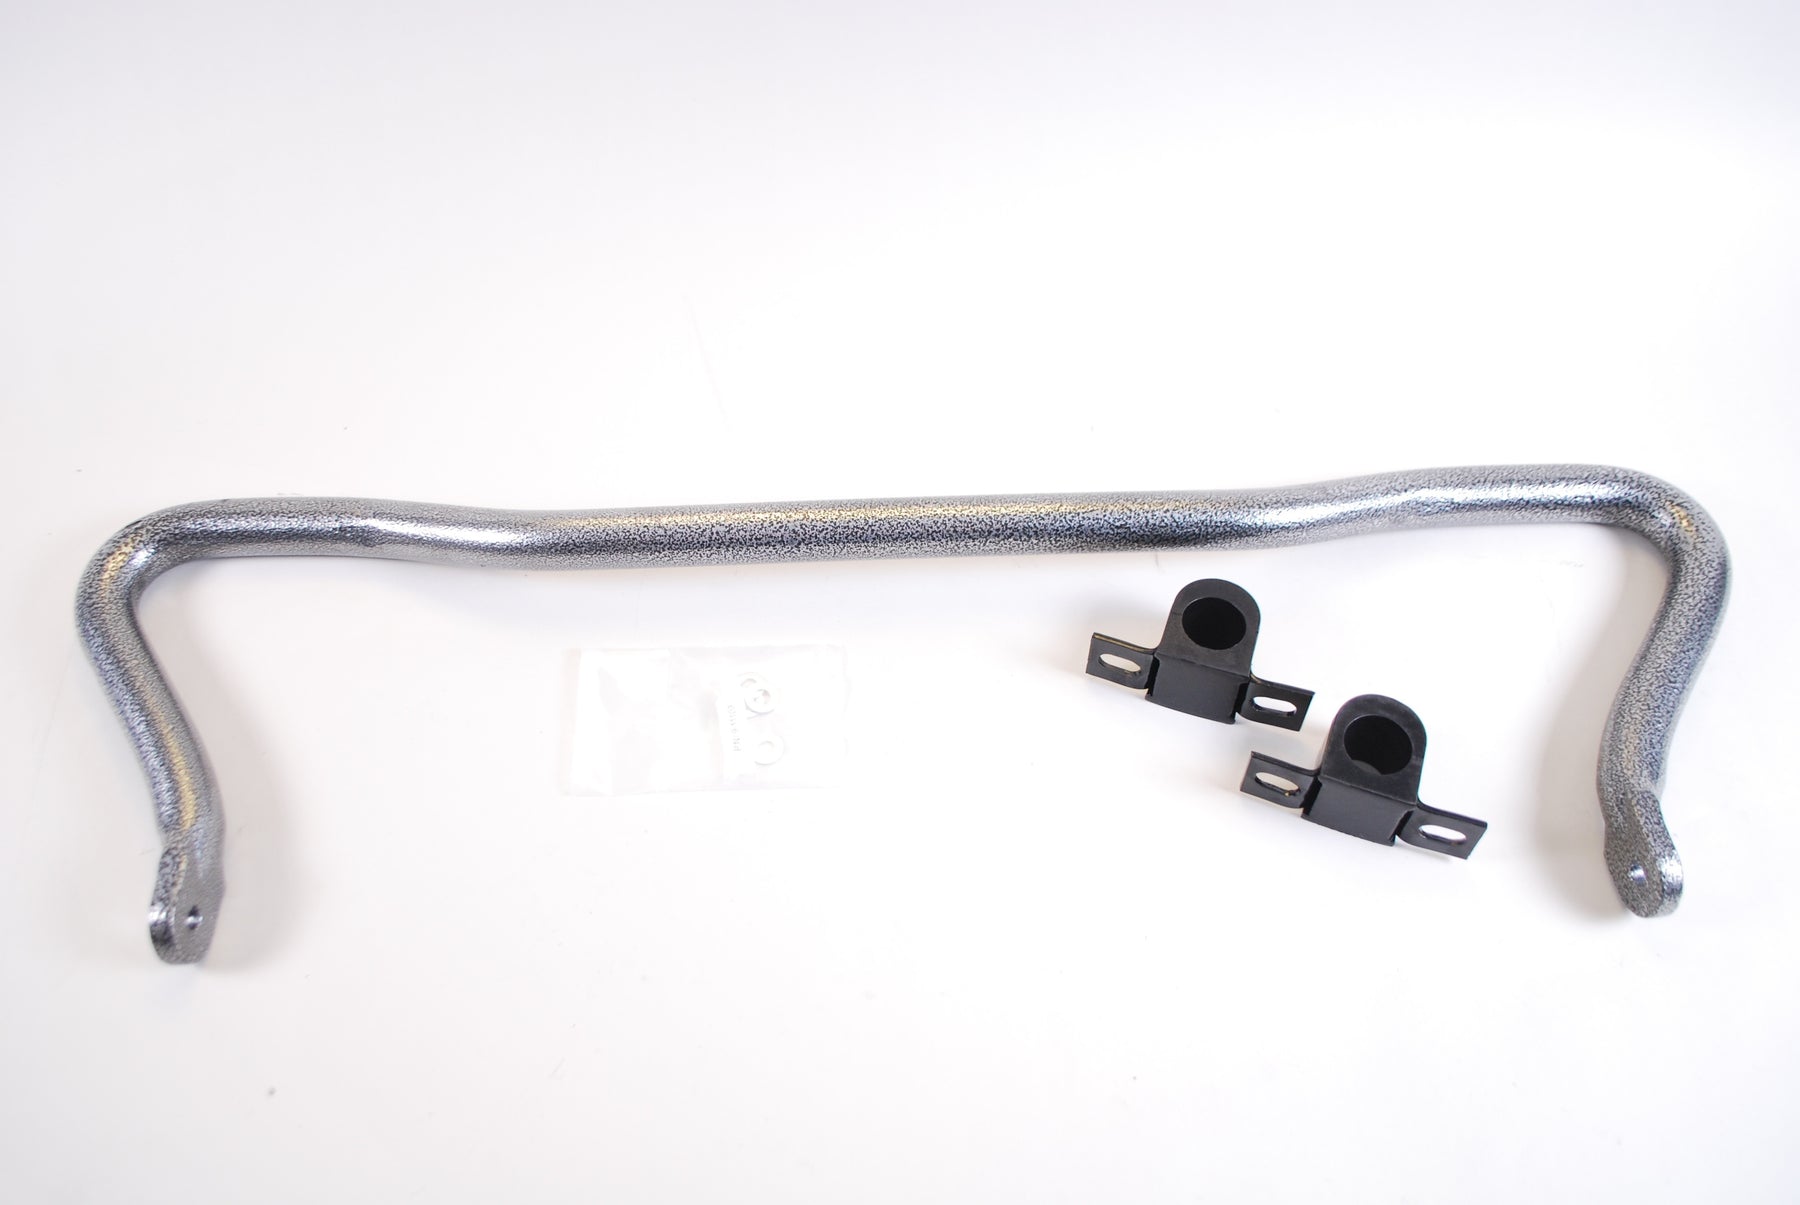 00-05 Ford Excursion 4WD Front Sway Bar